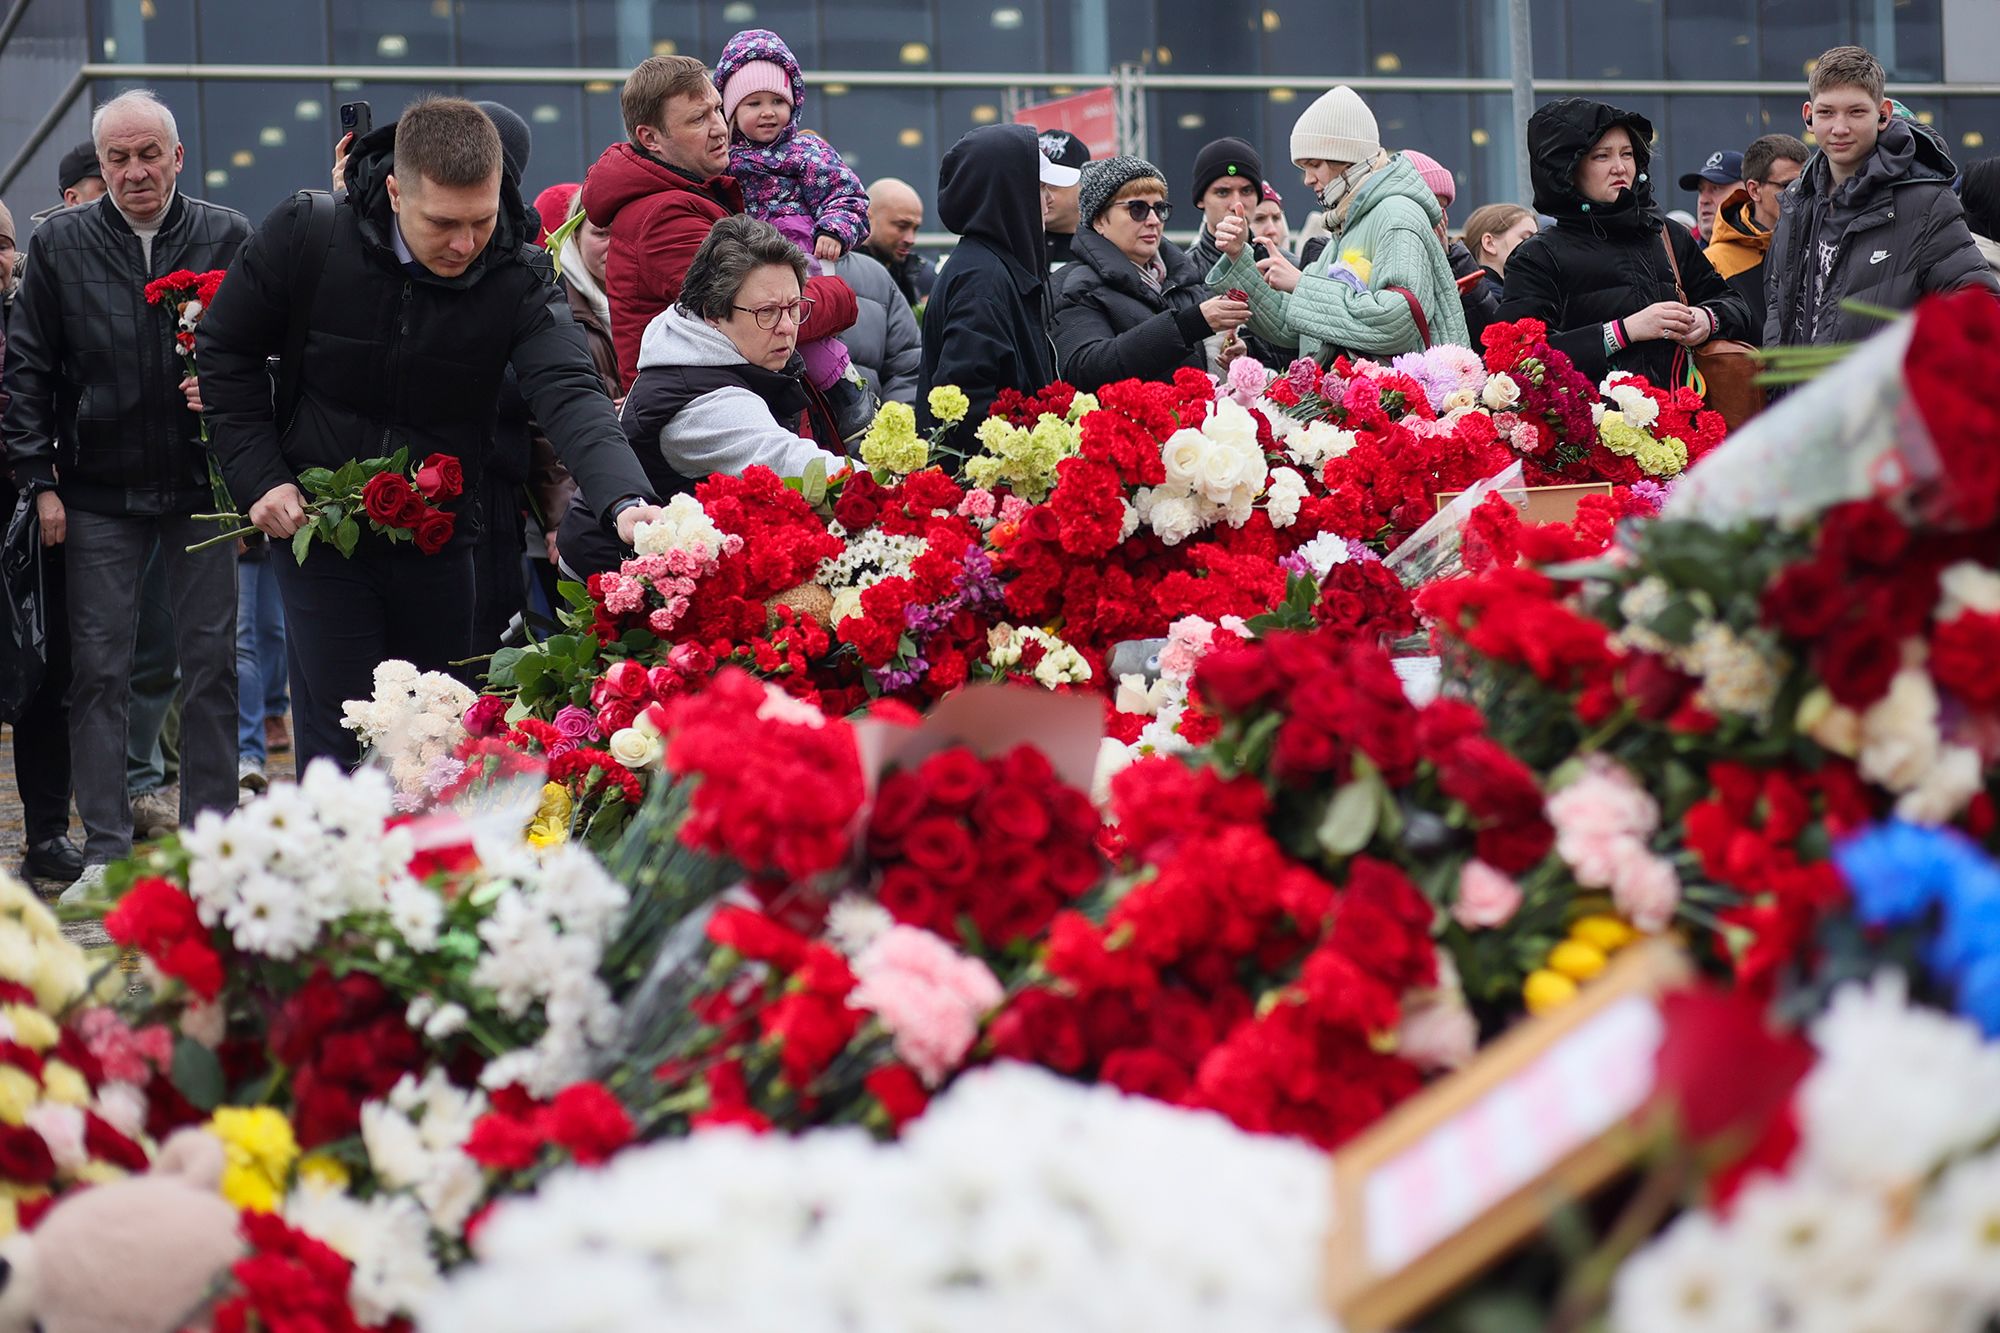 5 things to know for March 25: Moscow attack, Trump trials, Severe weather, Gaza, Plane safety - International News - News